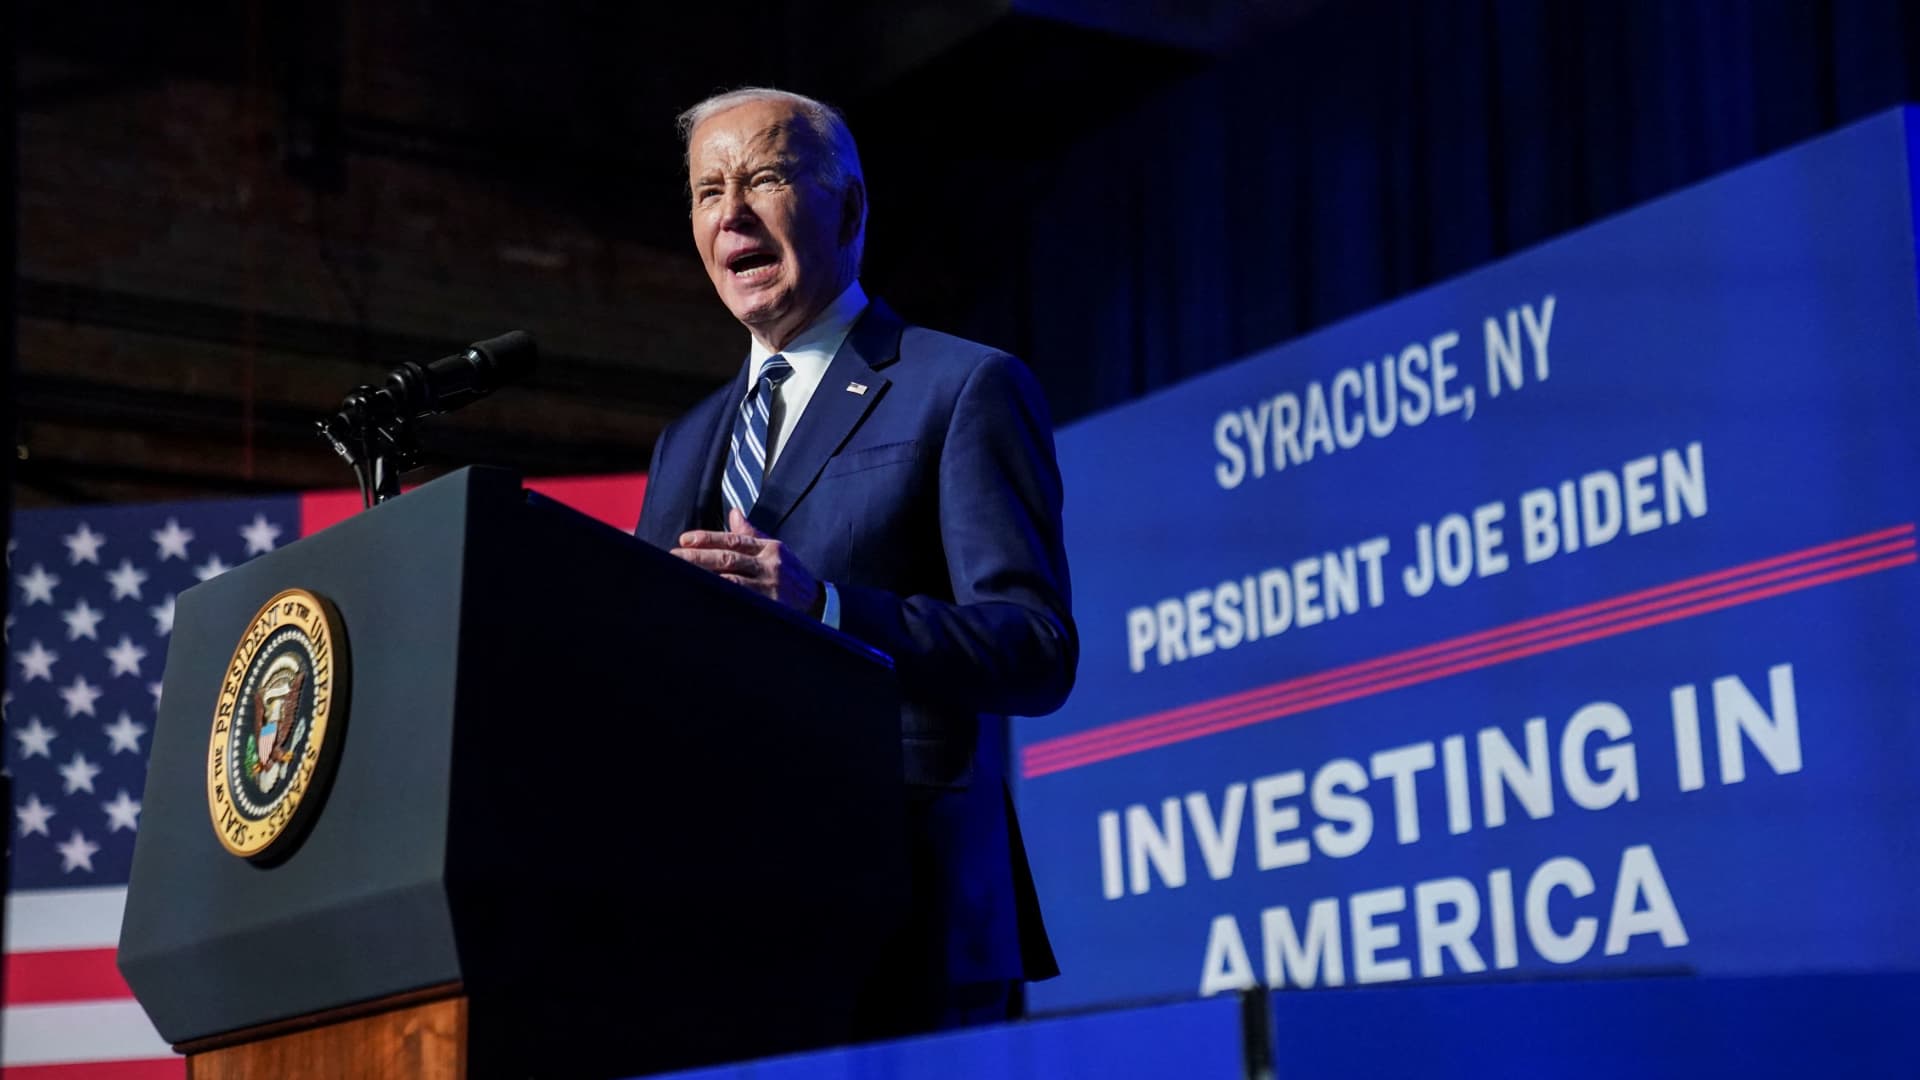 Biden faces slew of lawsuits as business groups claim overreach